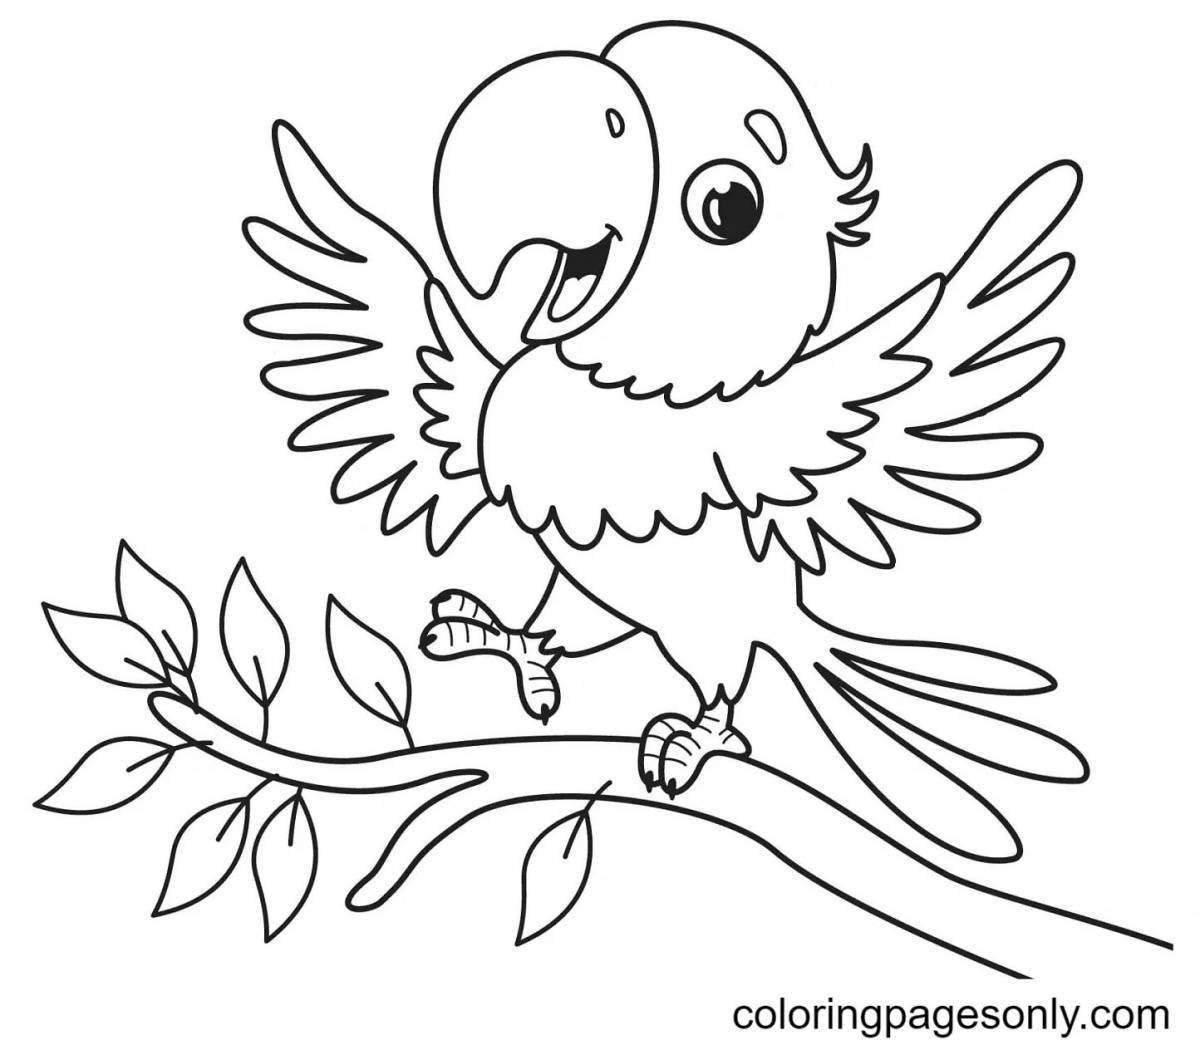 Wonderful parrot coloring book for 3-4 year olds